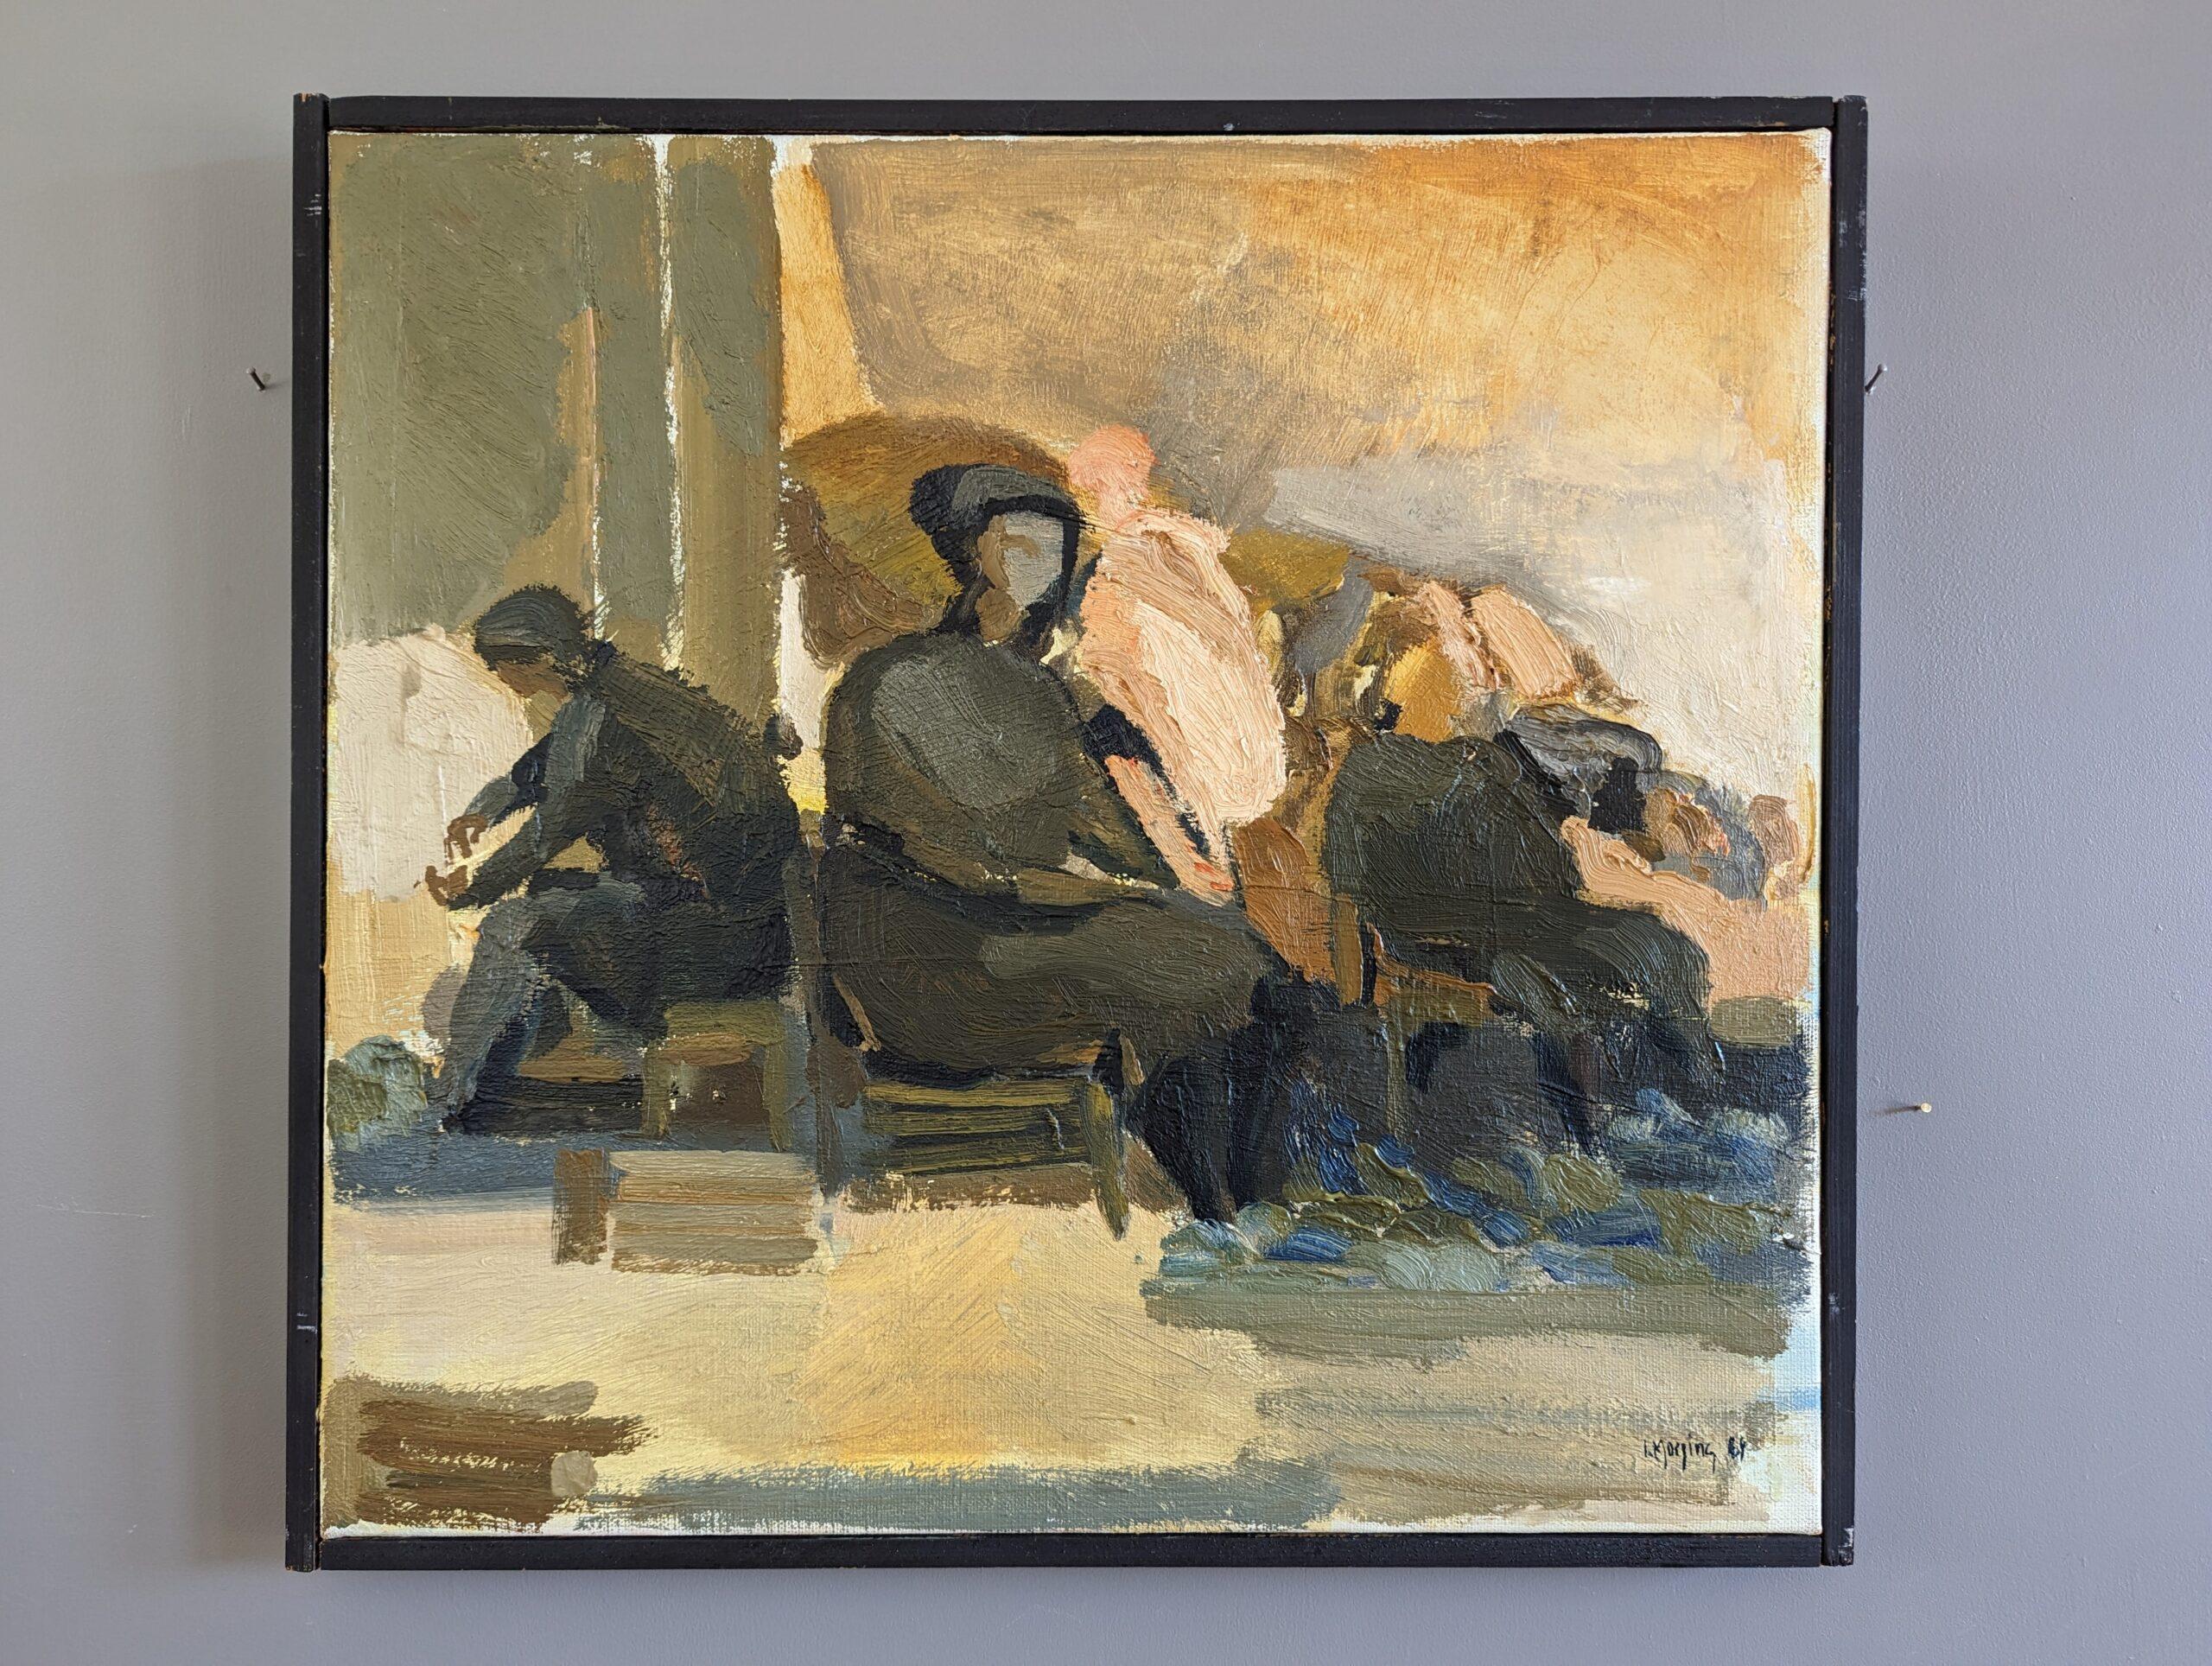 SEATED TRIO
Size: 45 x 48 cm (including frame)
Oil on Canvas

A brilliantly executed semi-abstract figurative oil composition, painted in 1964 by the established Swedish artist Ivar Morsing (1919-2009), whose works have been exhibited in public